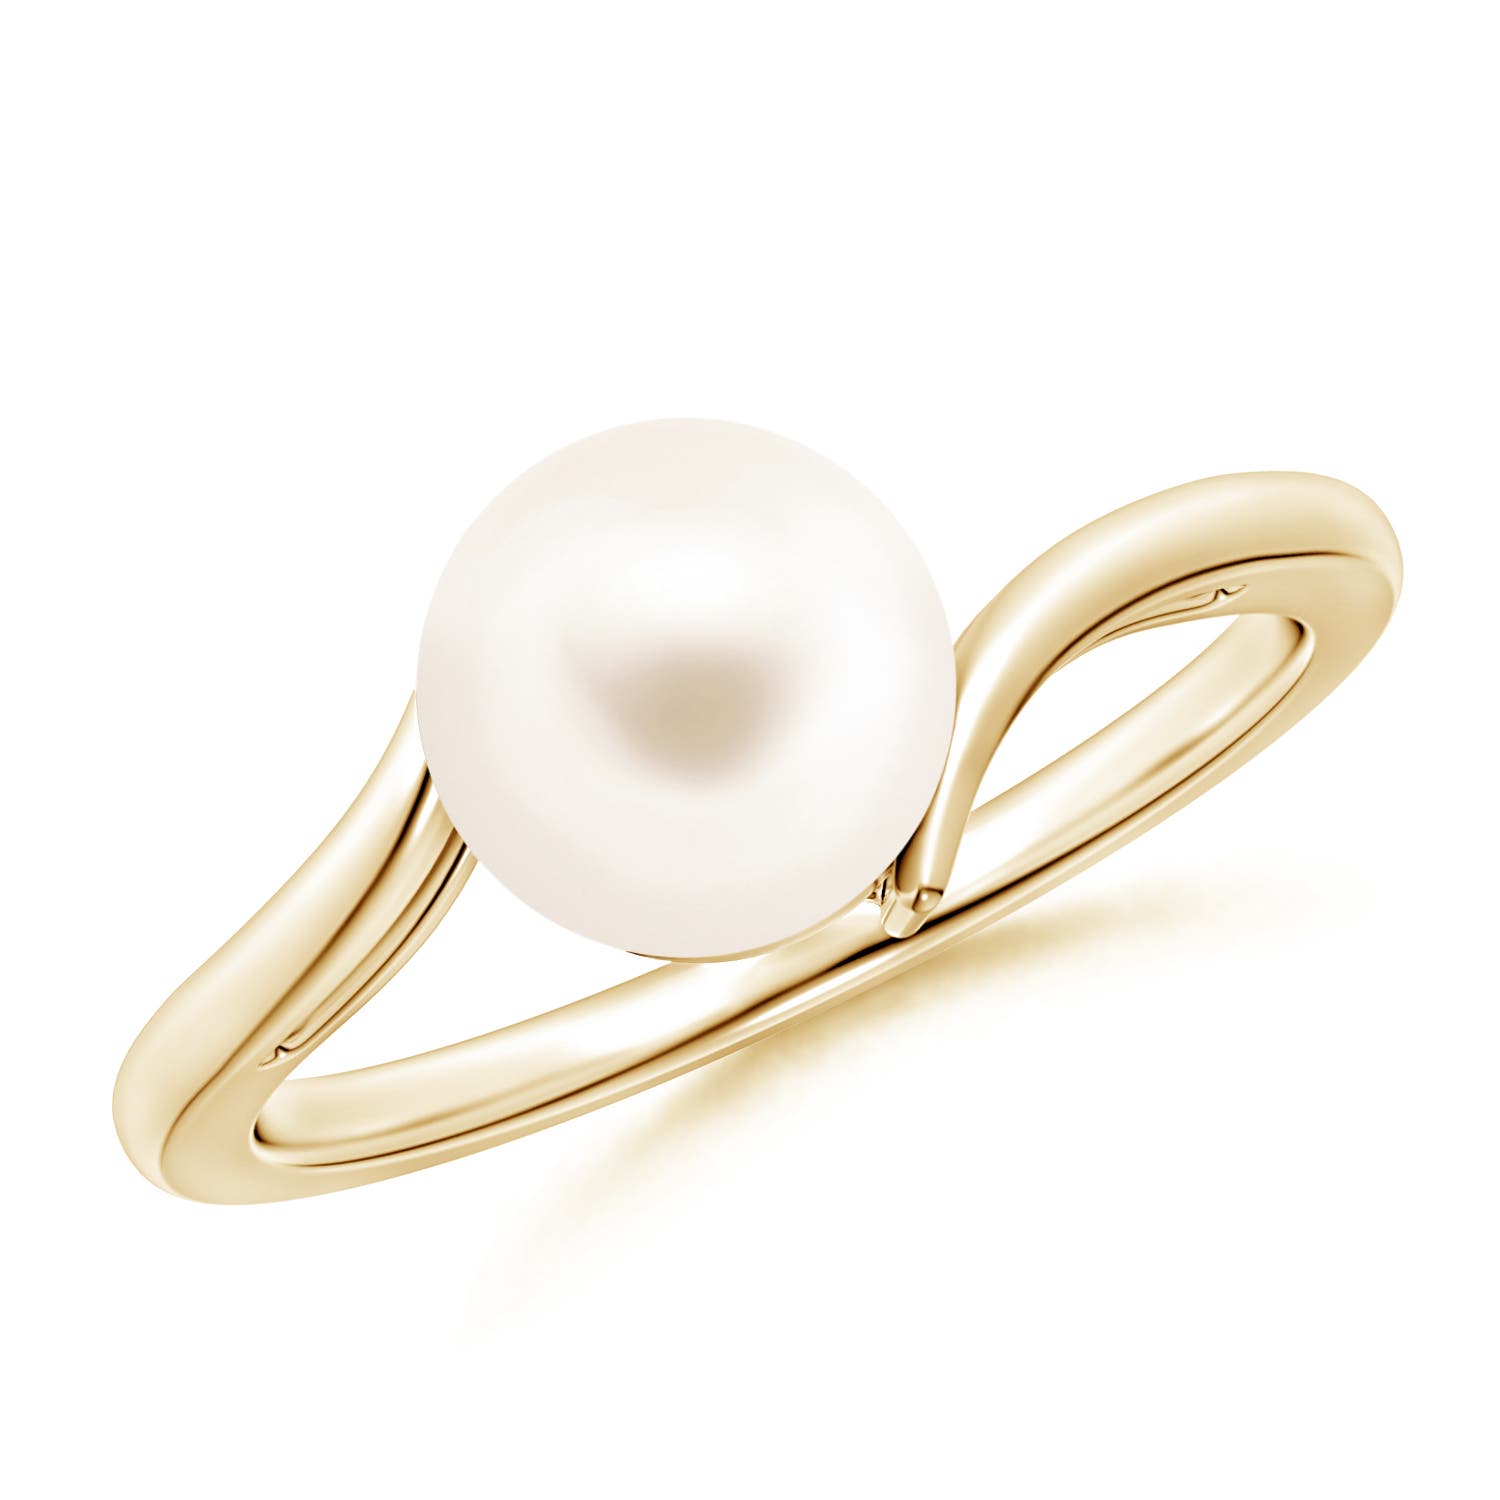 Pearl Ring | Gold Pearl and Diamond Ring | Adjustable Rings for Women –  Huge Tomato